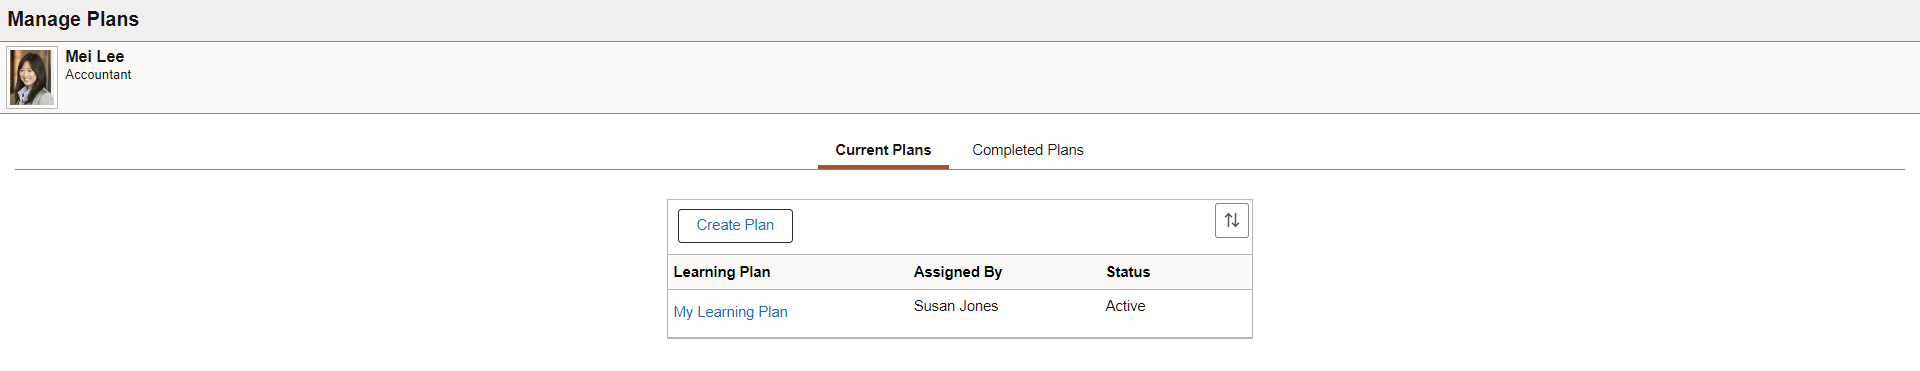 Current Plans Tab in Manage Plans Page